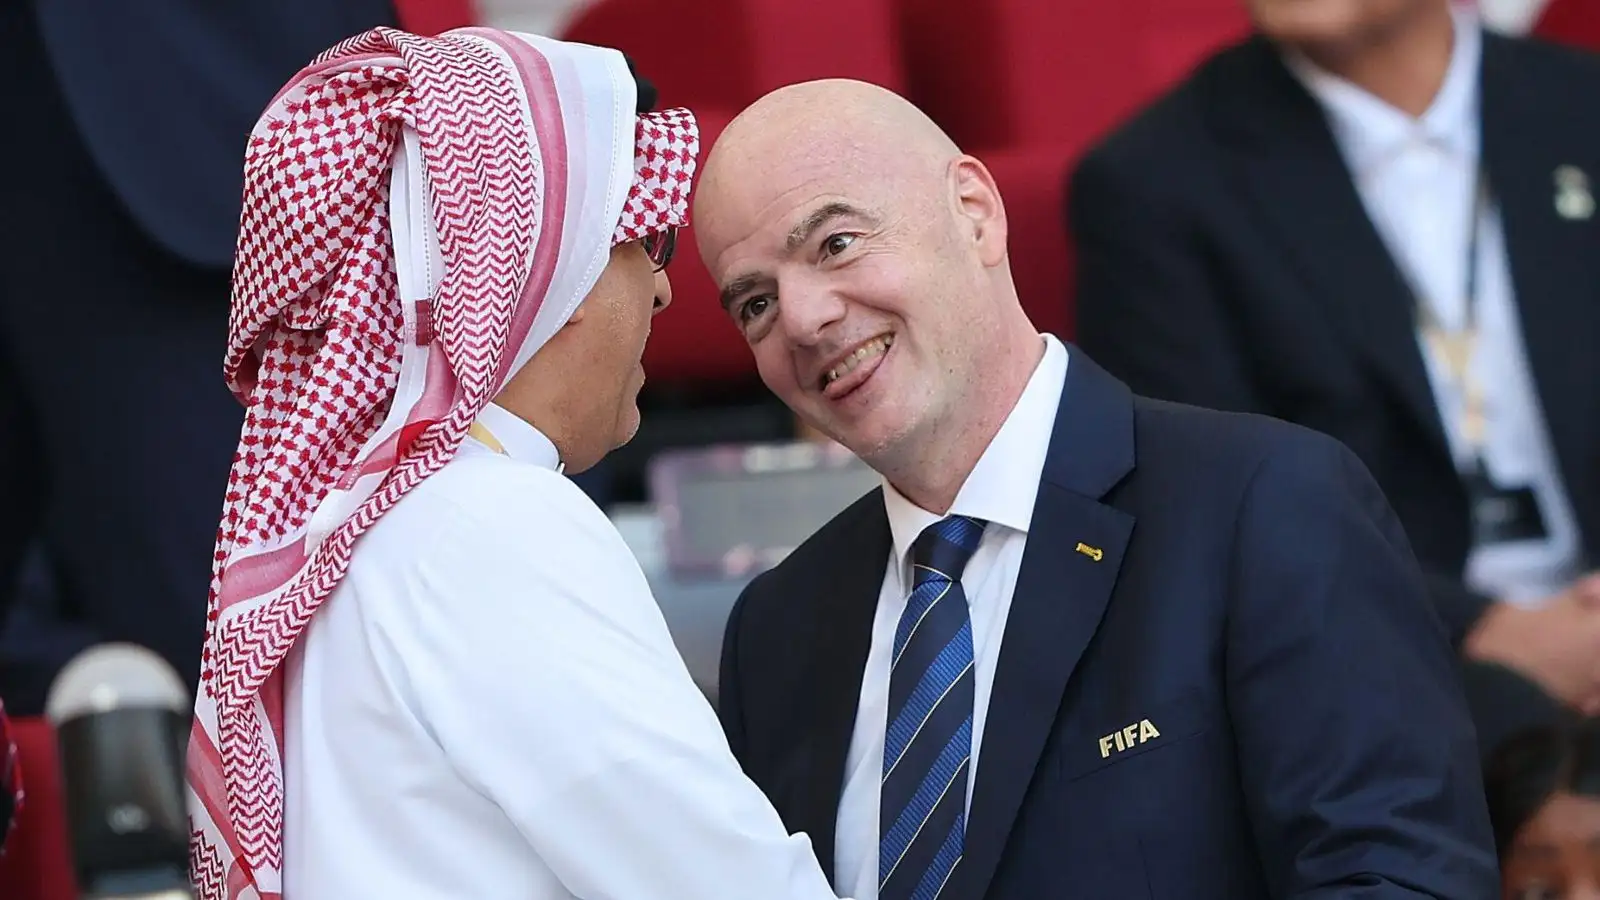 Infantino hails 'best group stage ever' in Qat